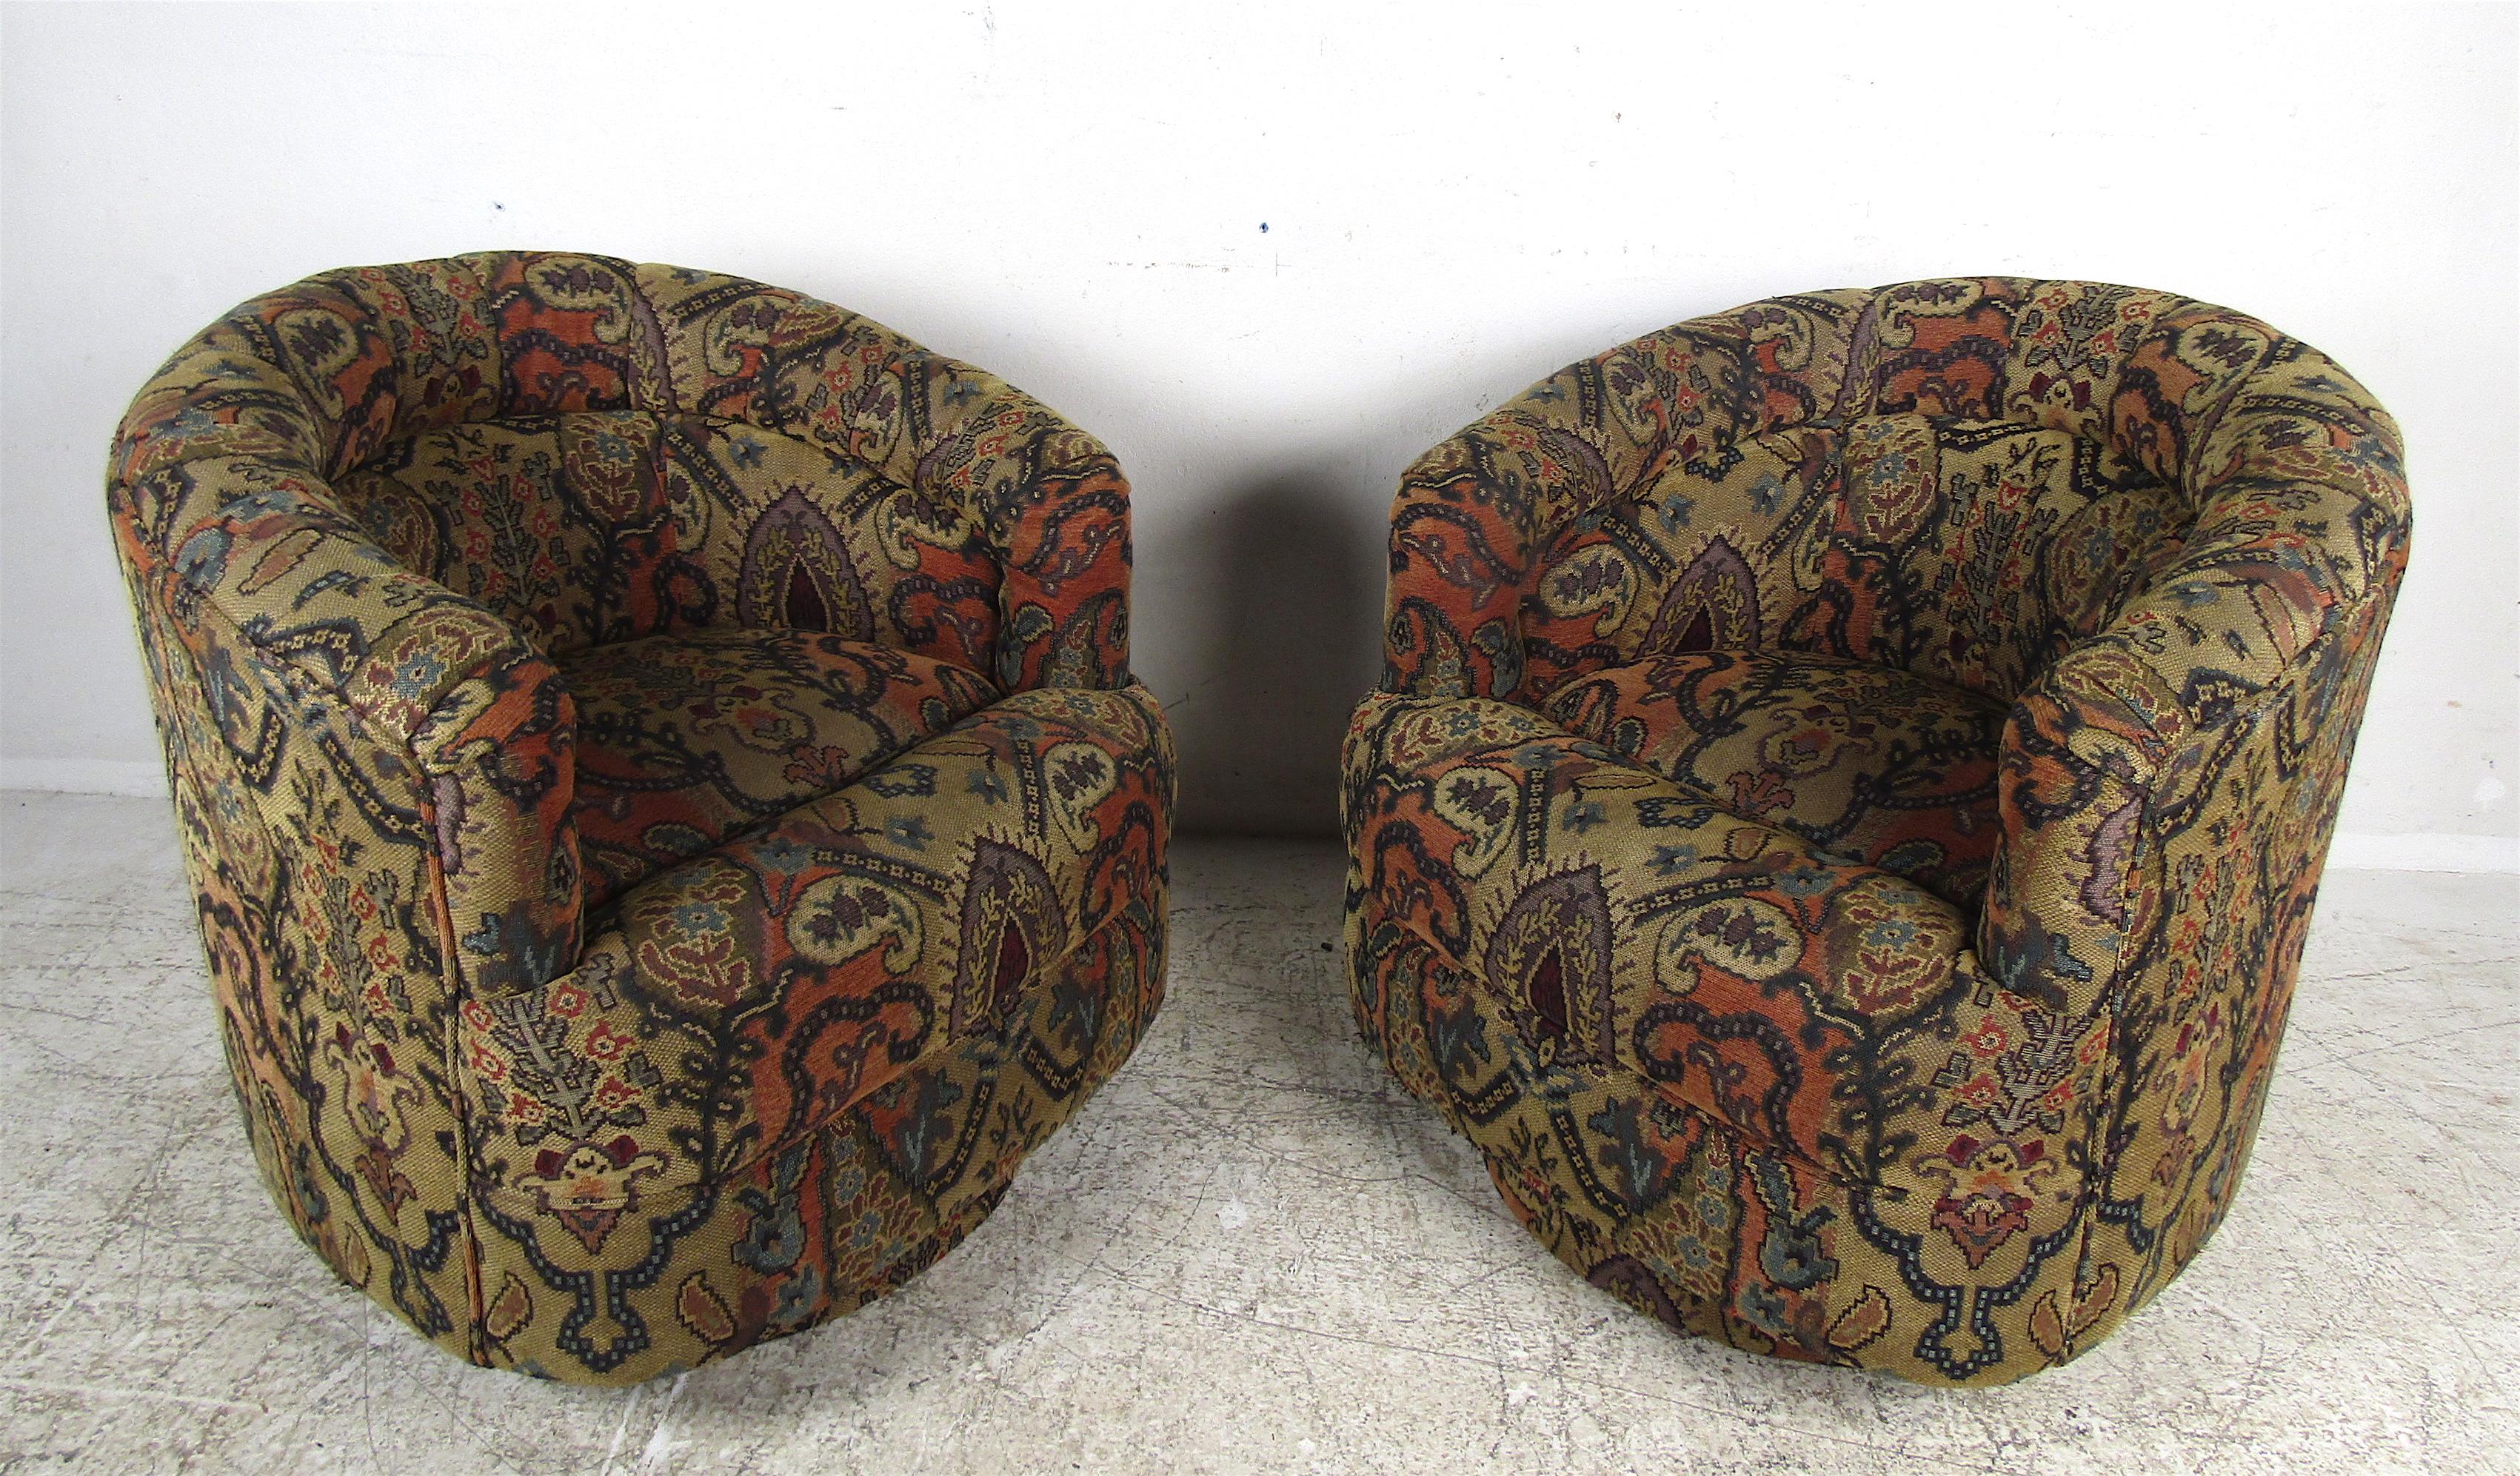 A stunning pair of vintage modern lounge chairs that include the label for Thayer Coggin underneath. An unusual design with abnormally placed cushions for added comfort. The plush colorful upholstery would complement any seating arrangement. The